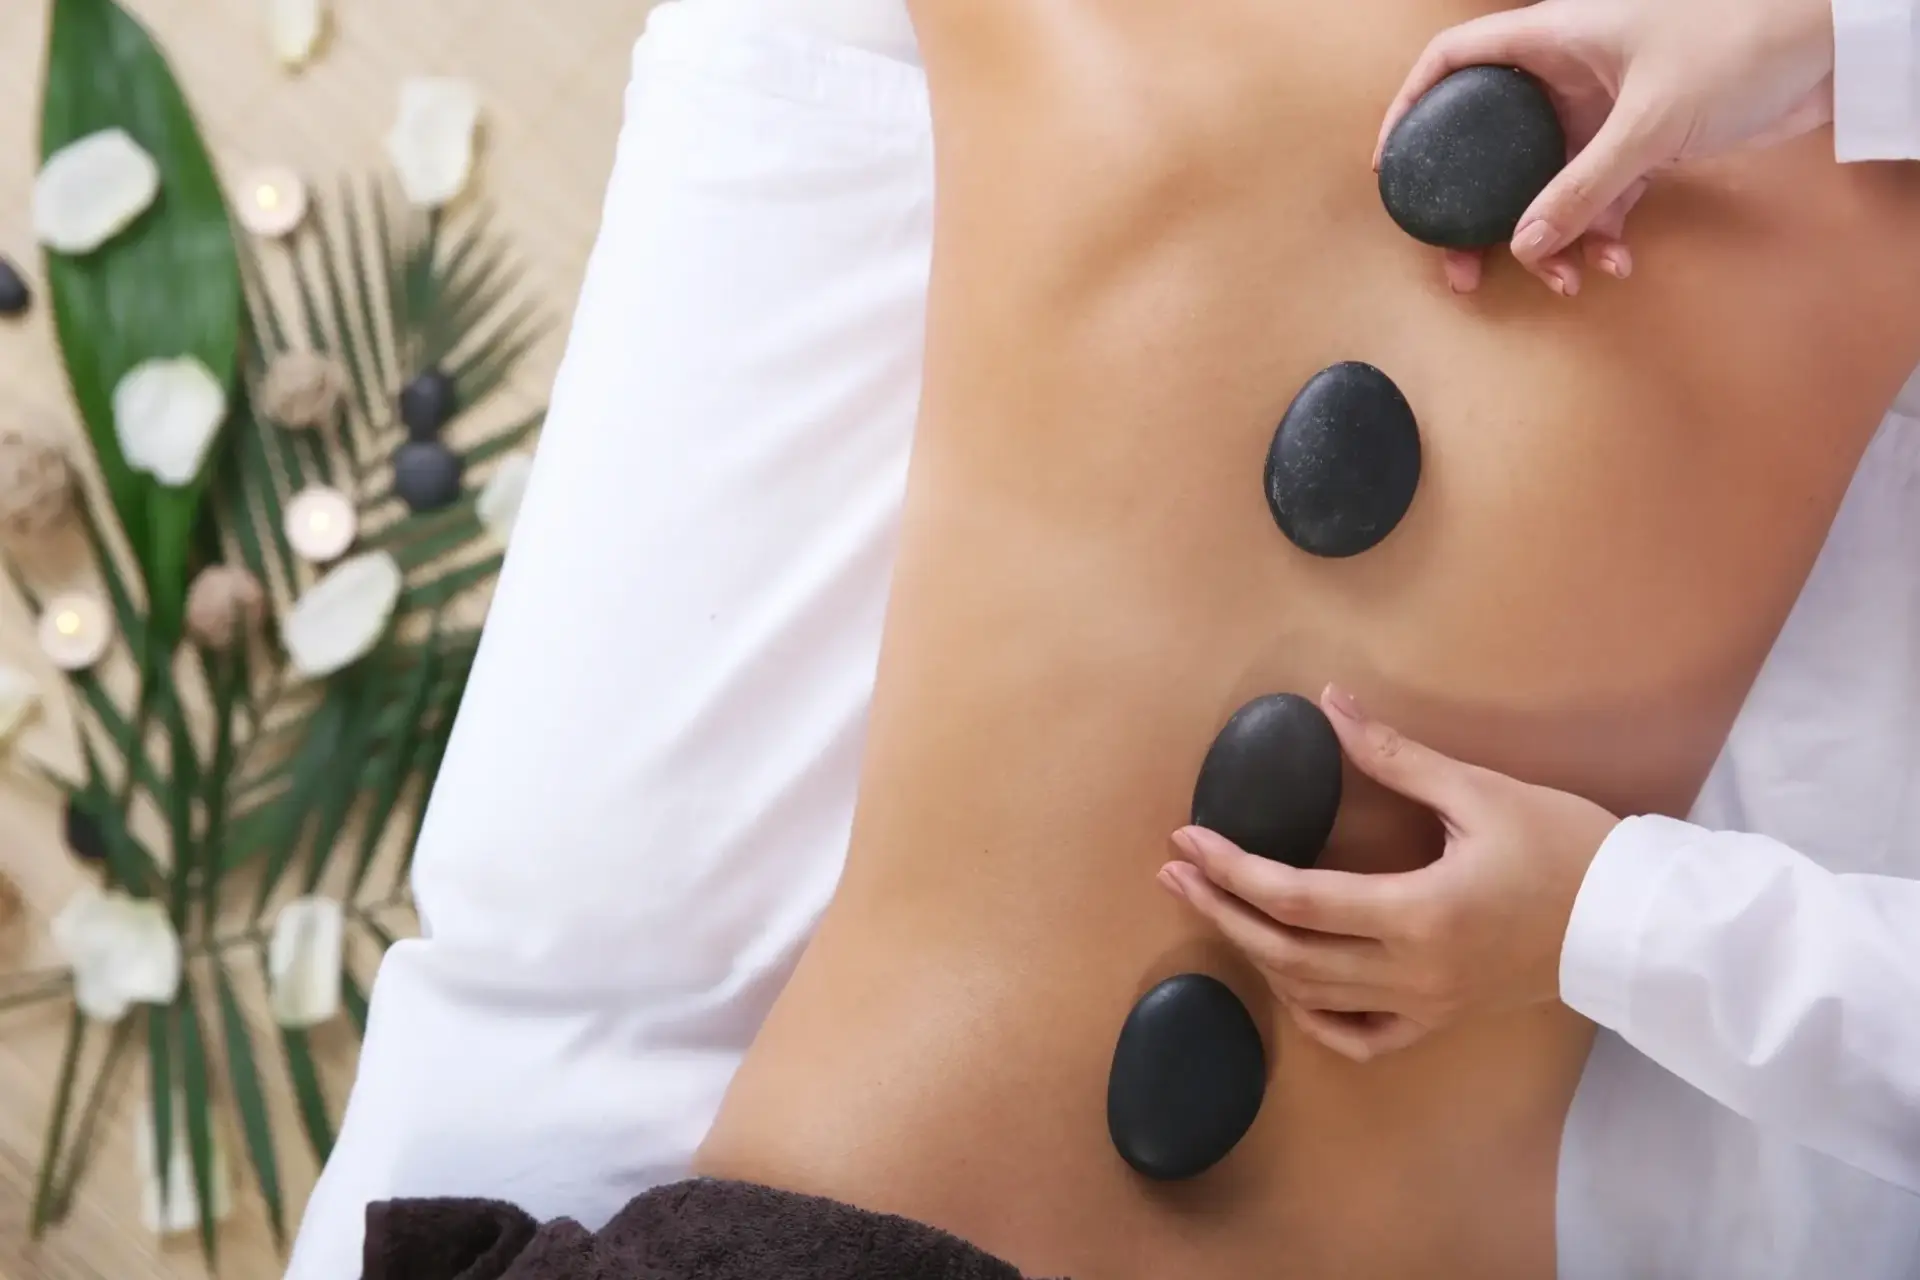 A person getting their back covered with hot stones.